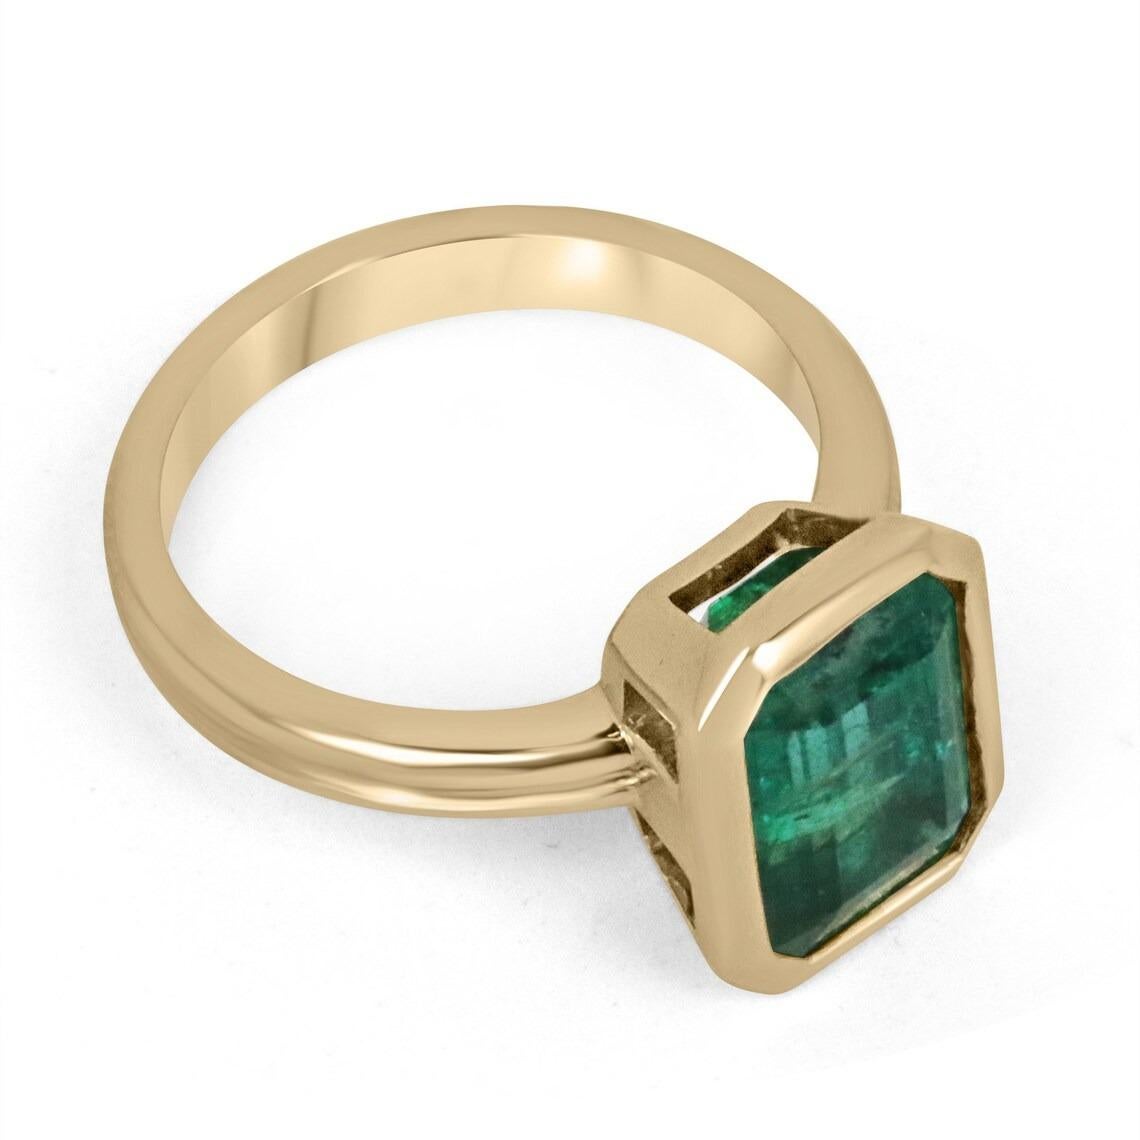 Displayed is a stunning emerald solitaire engagement or right-hand ring in 14K yellow gold. This gorgeous solitaire ring carries an estimated 4.45-carat emerald in a bezel setting. Fully faceted, this gemstone showcases excellent shine and